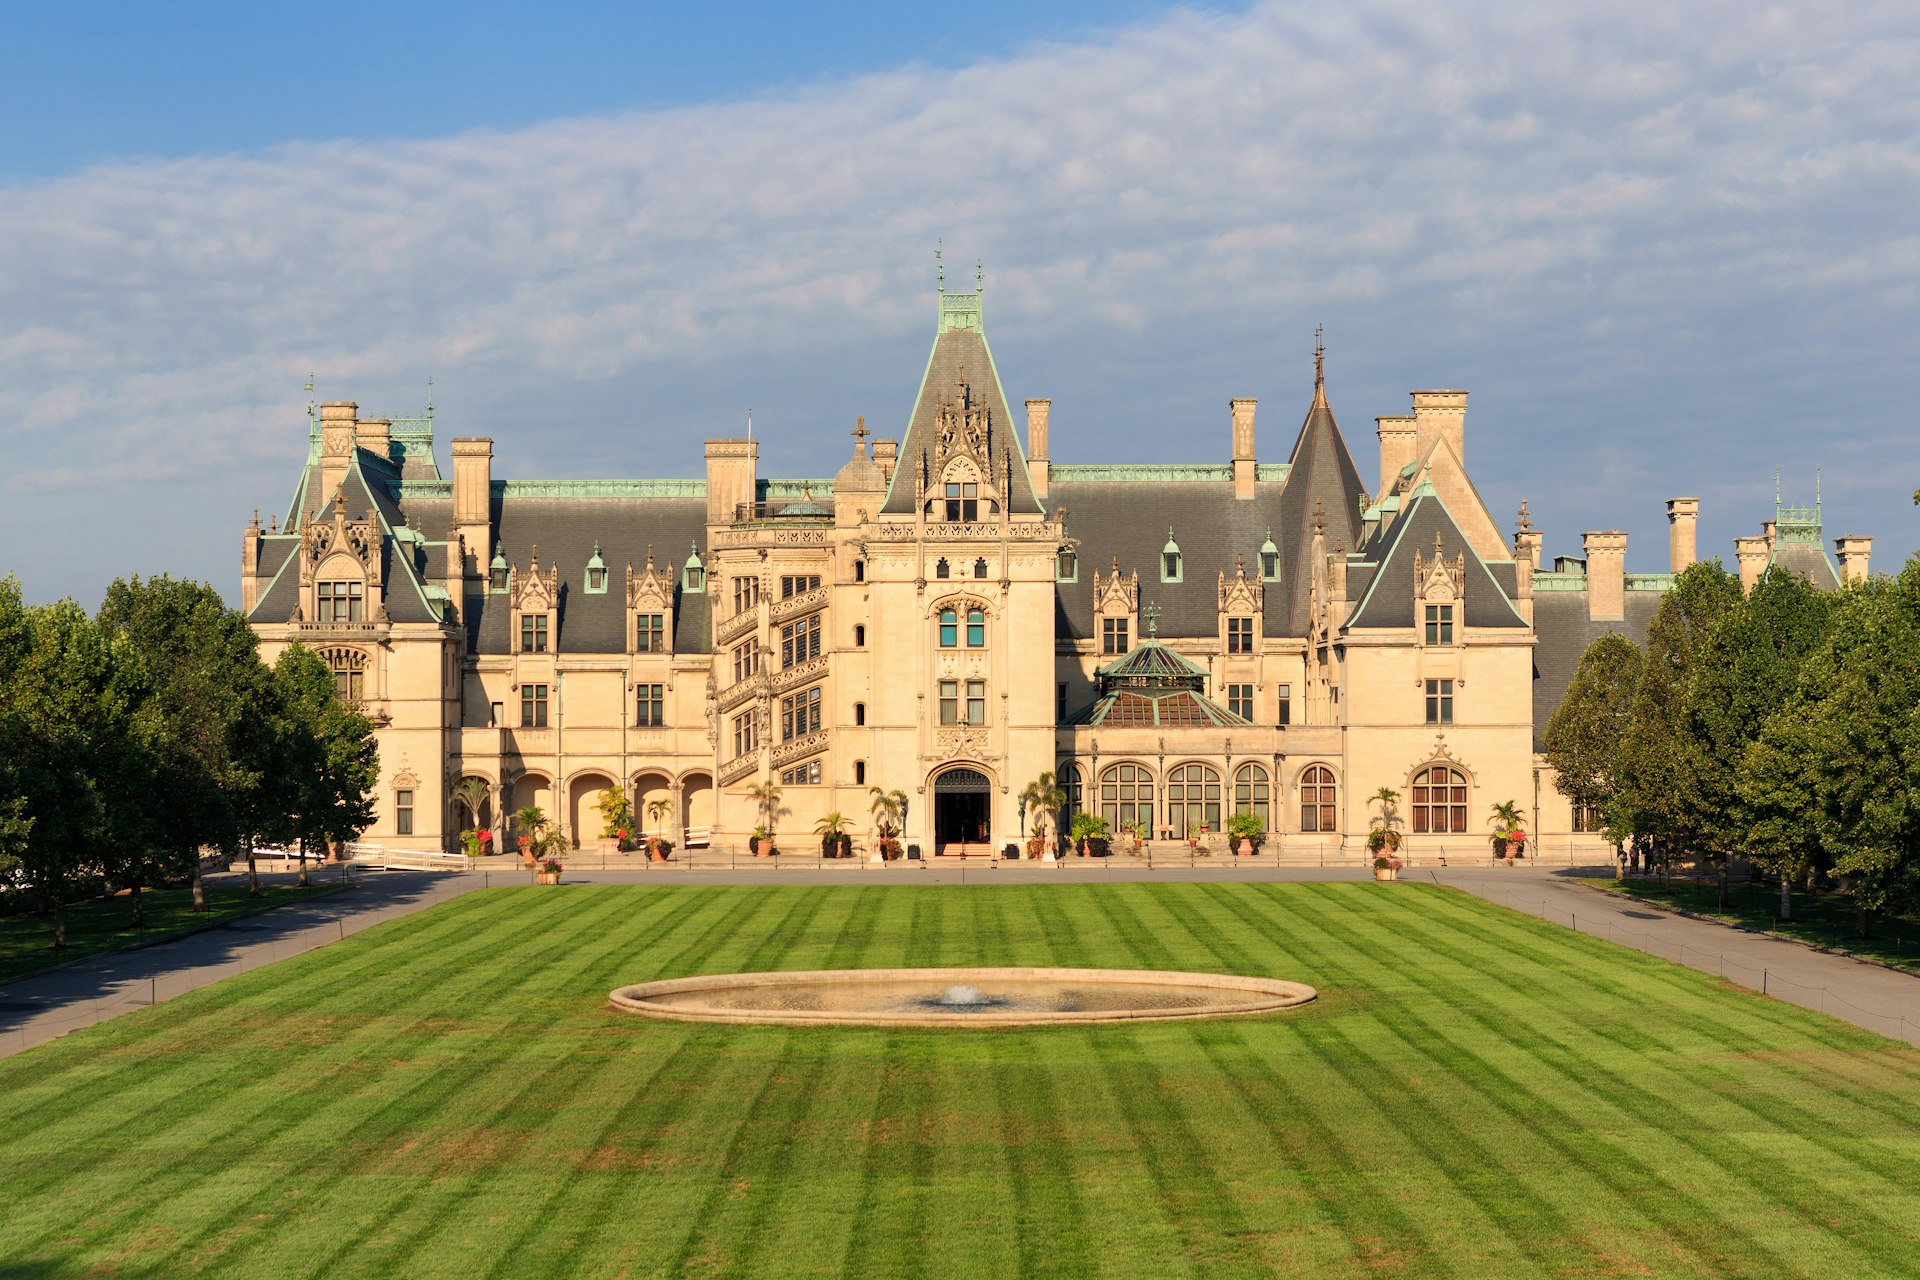 Exterior of the Biltmore Estate and its large lawn in Asheville